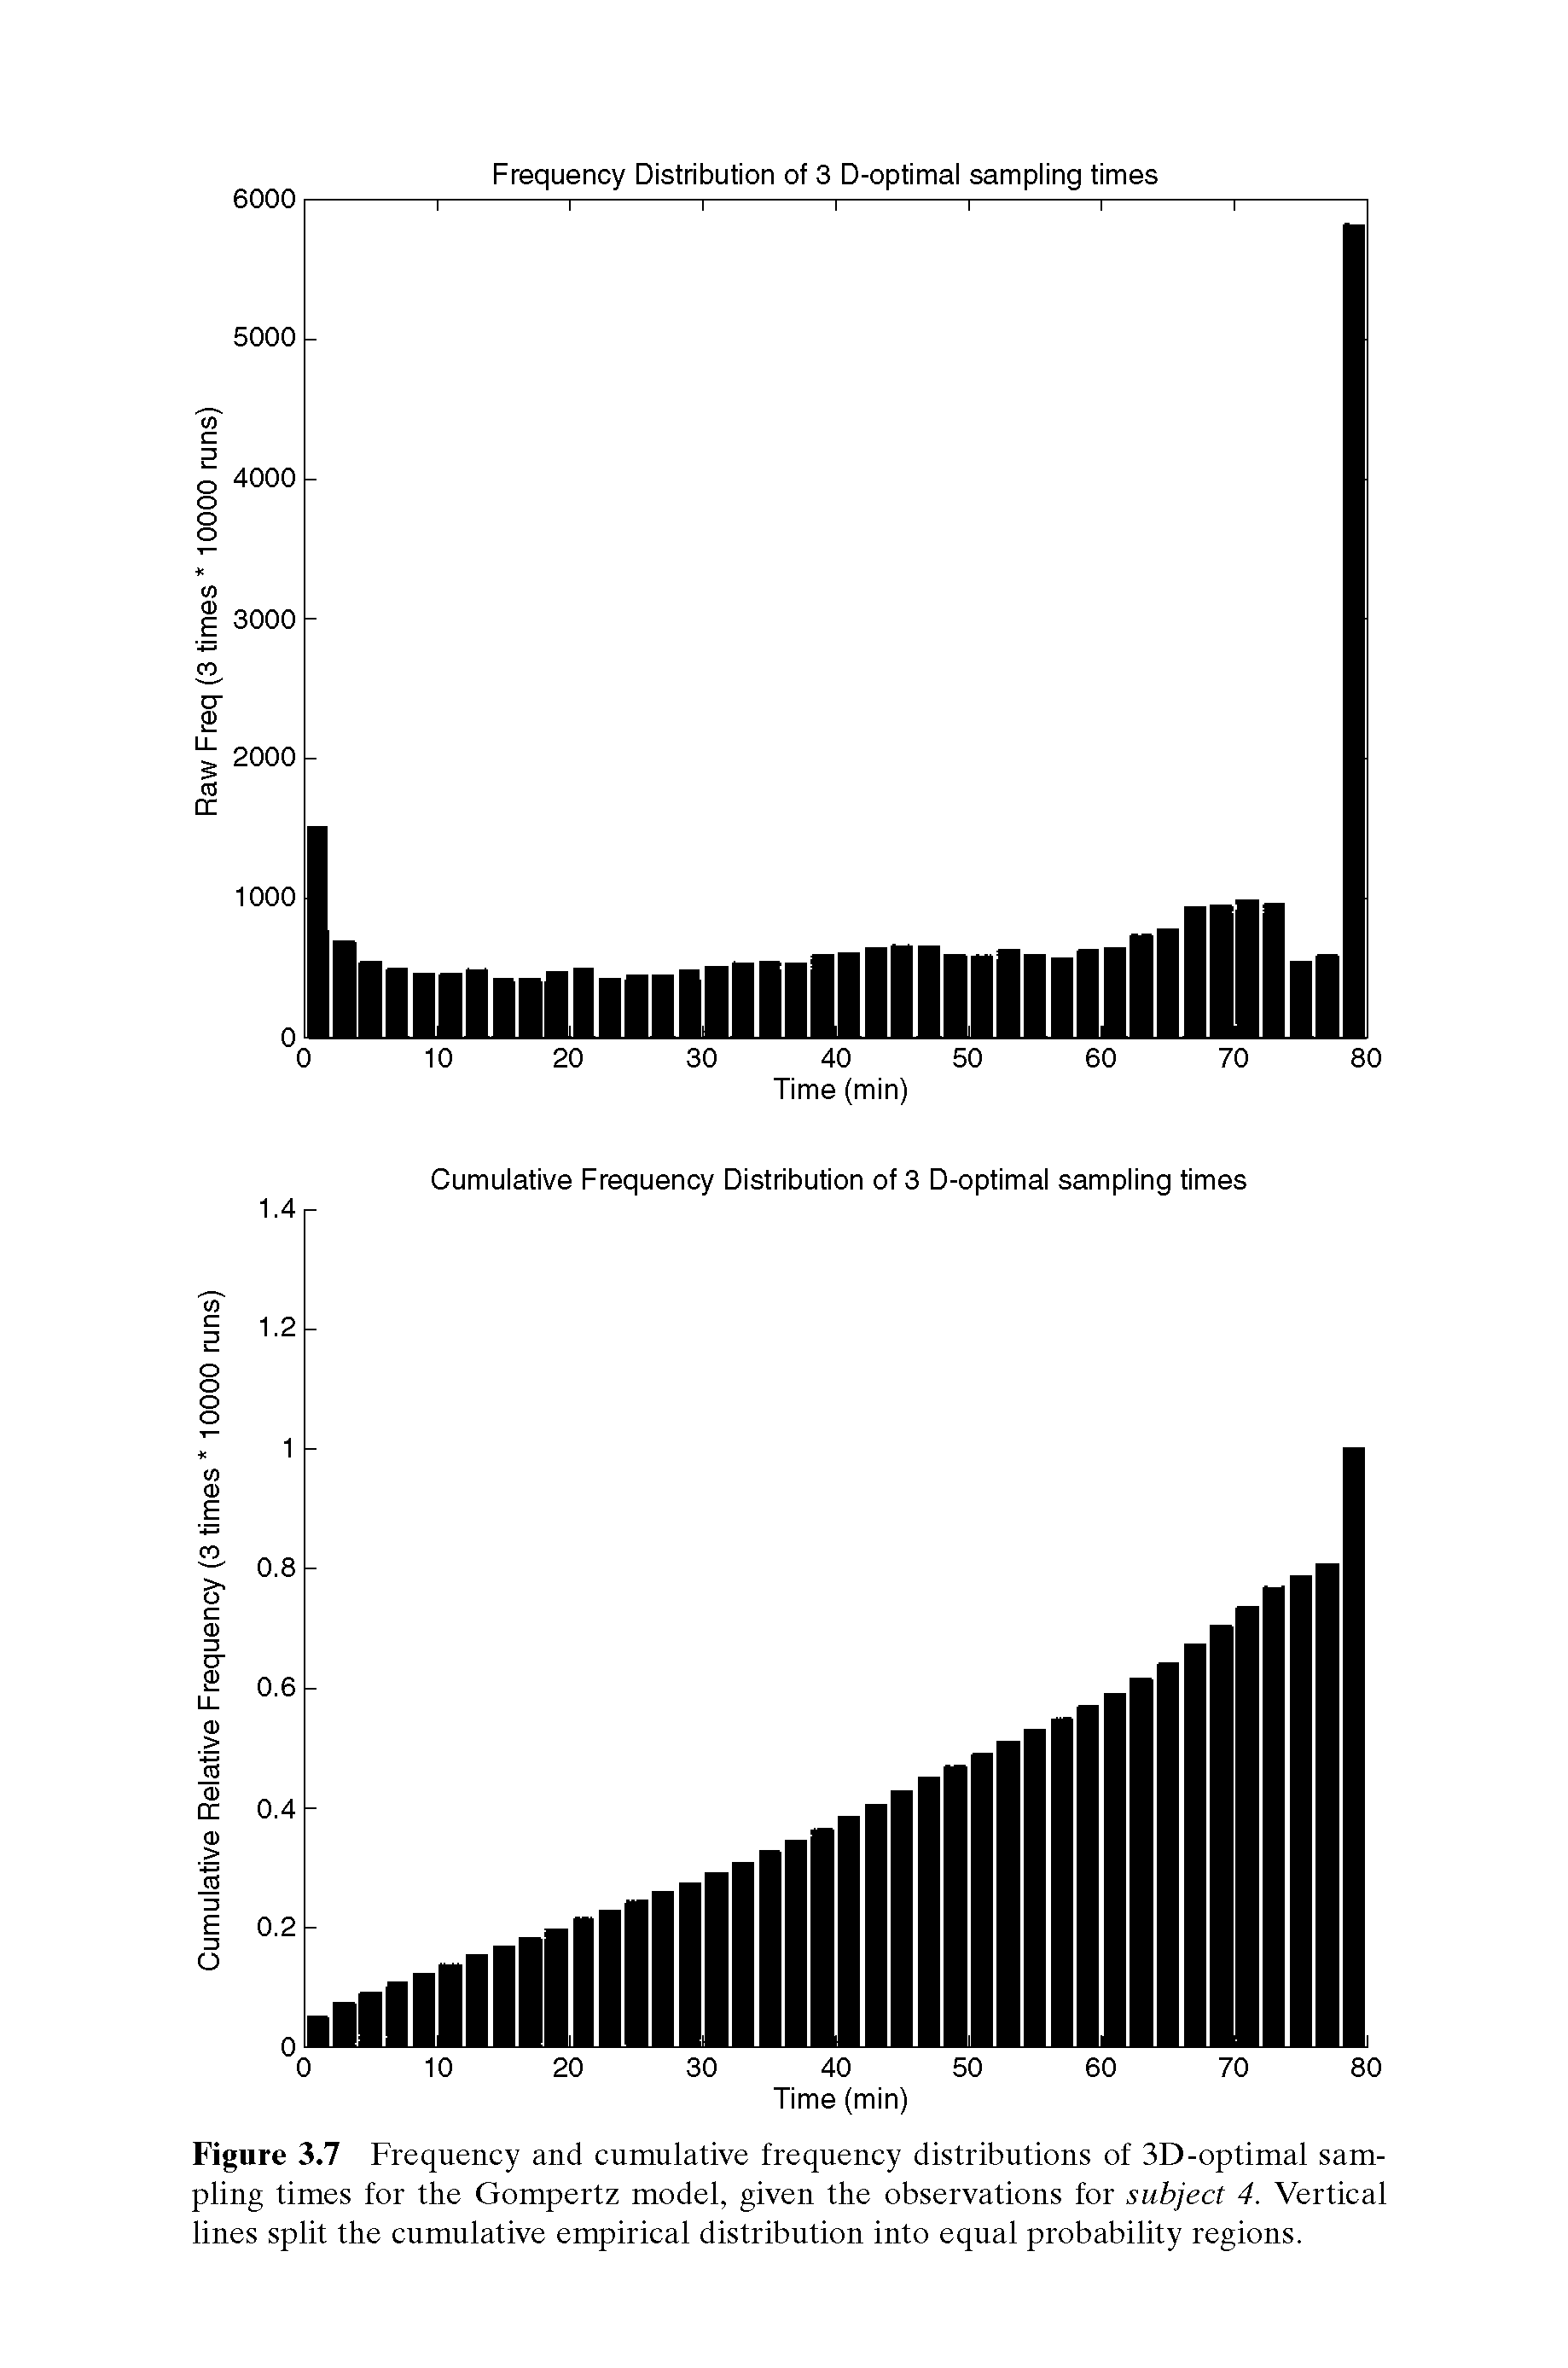 Figure 3.7 Frequency and cumulative frequency distributions of 3D-optimal sampling times for the Gompertz model, given the observations for subject 4. Vertical lines split the cumulative empirical distribution into equal probability regions.